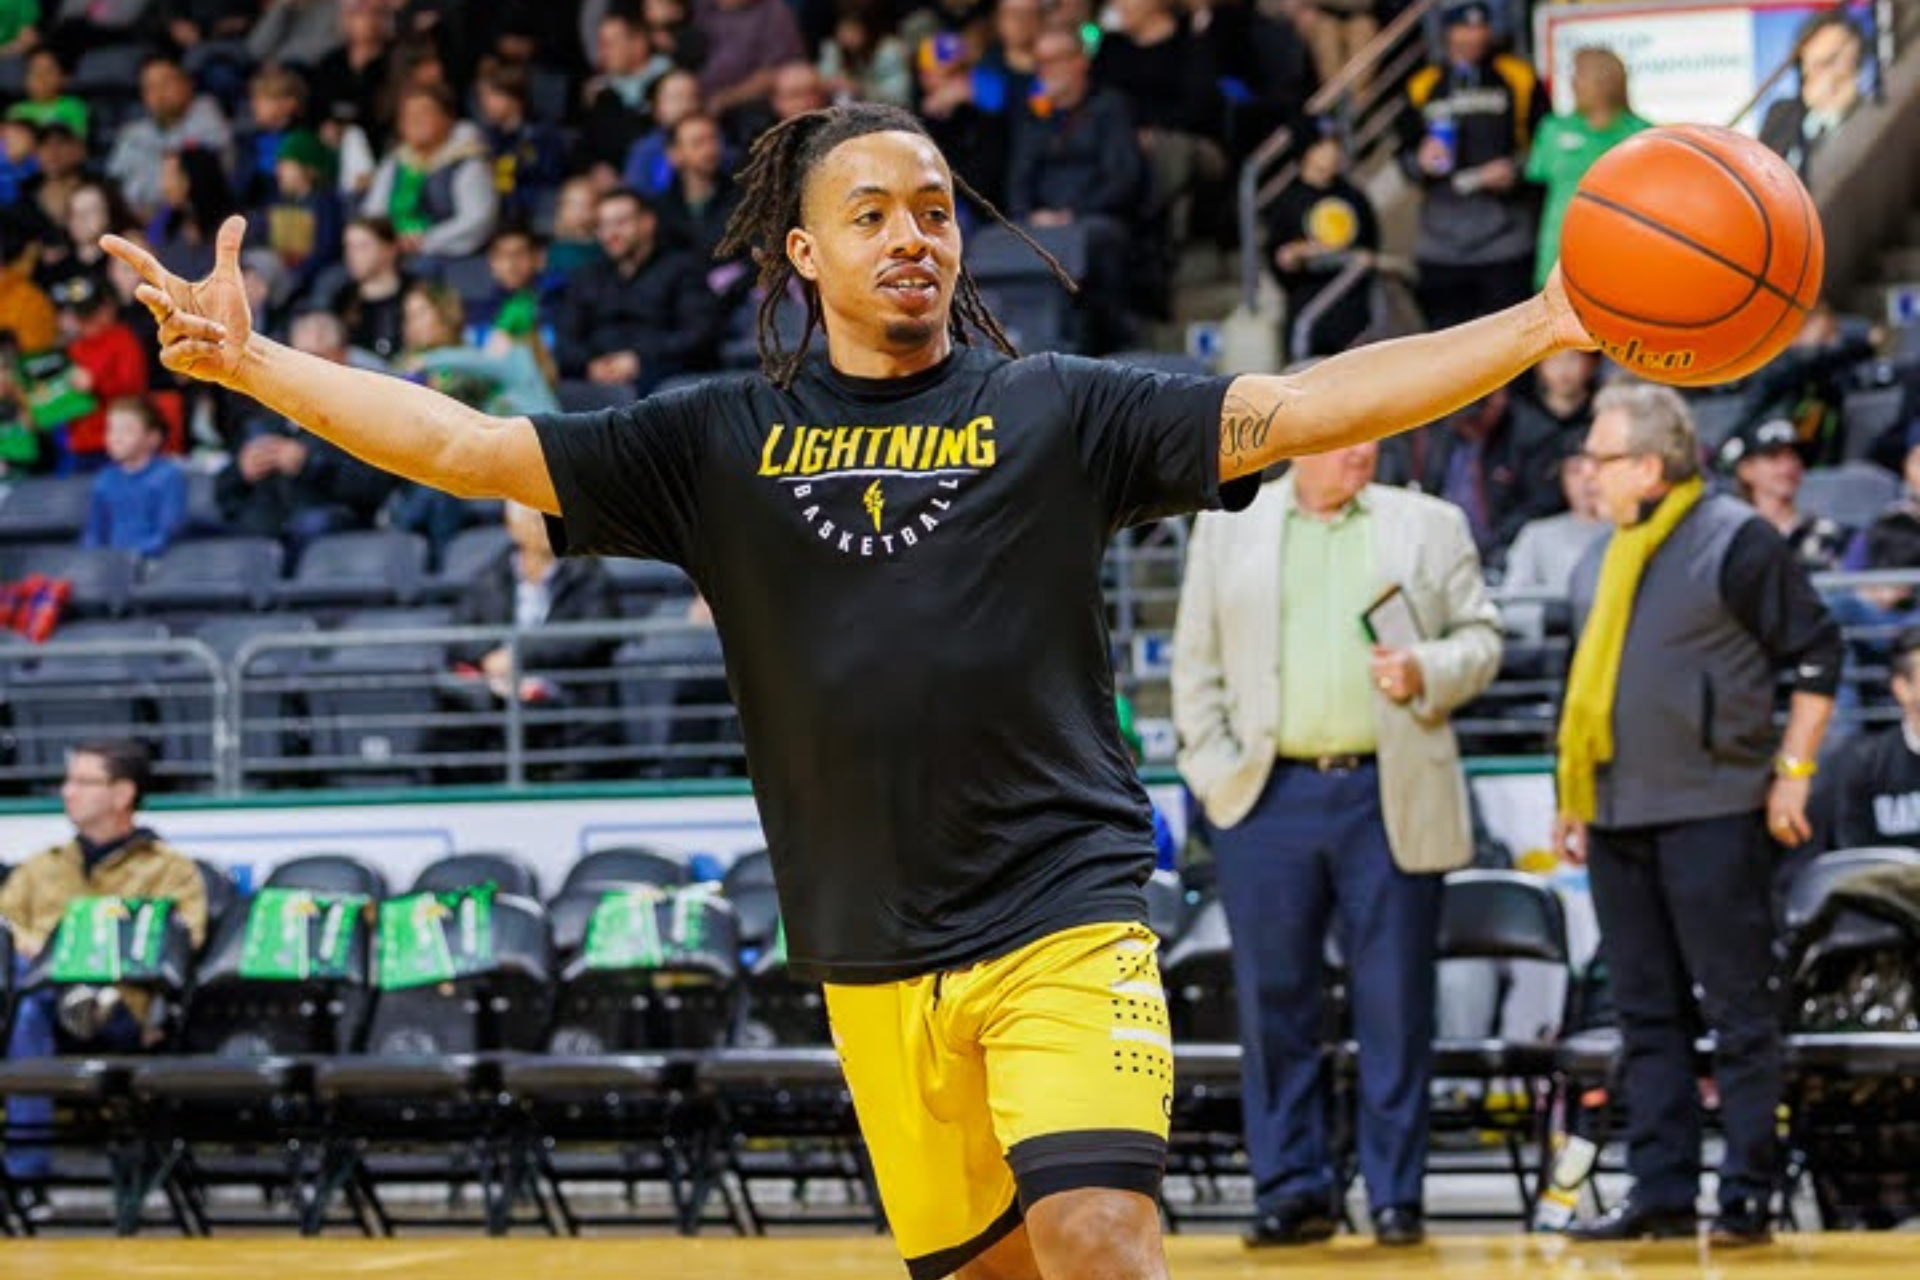 London Lightning Achieve Victory Over West Virginia Grind with Nick Garth Setting New BSL 3- Point Record